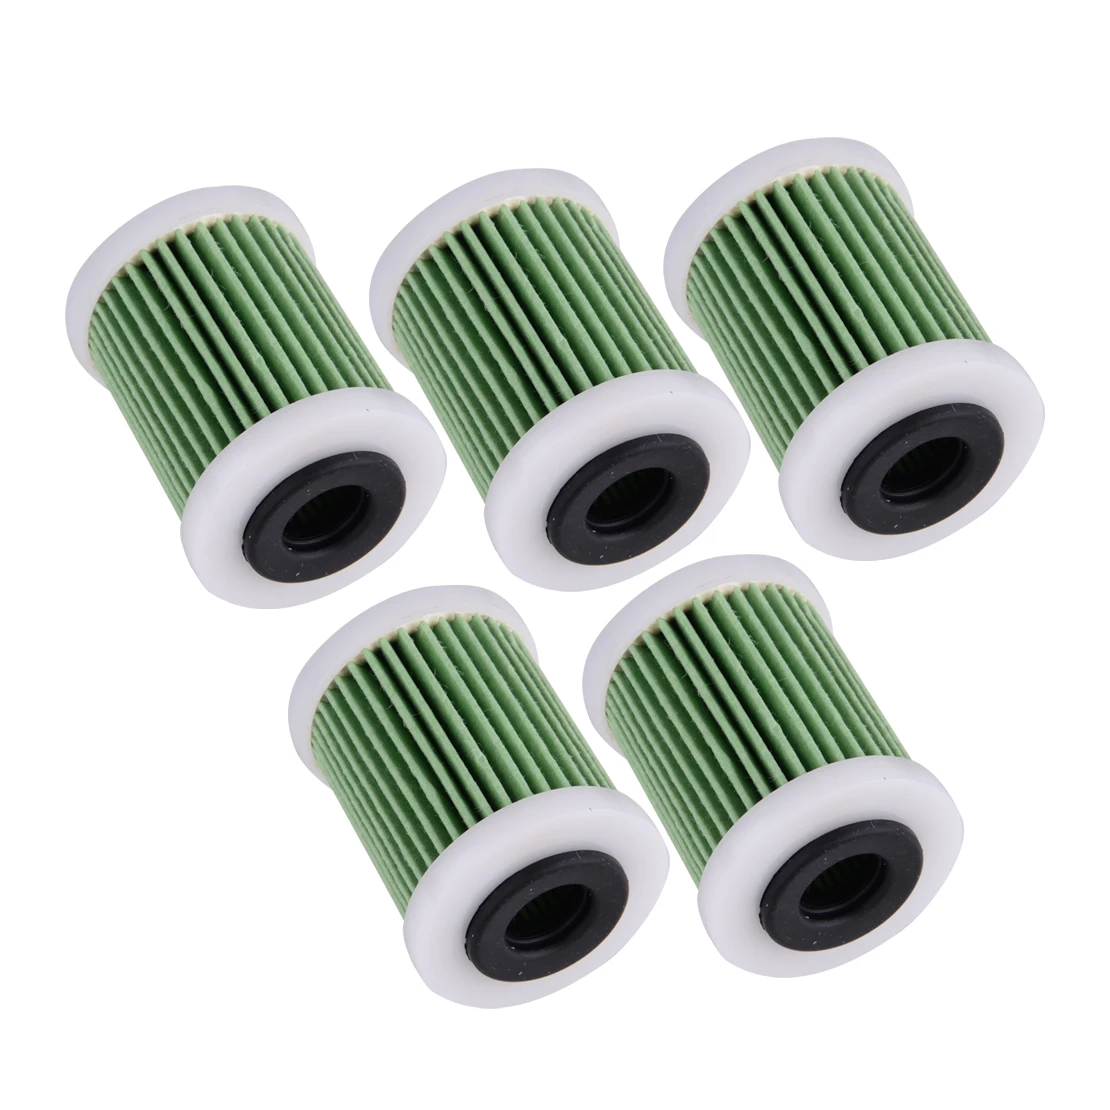 

6P3-WS24A-01-00 6P3-WS24A-00-00 6P3-24563-01-00 5pcs Outboard Motor Fuel Filter Fit for Yamaha 150 175 200 225 250 300 hp 2006